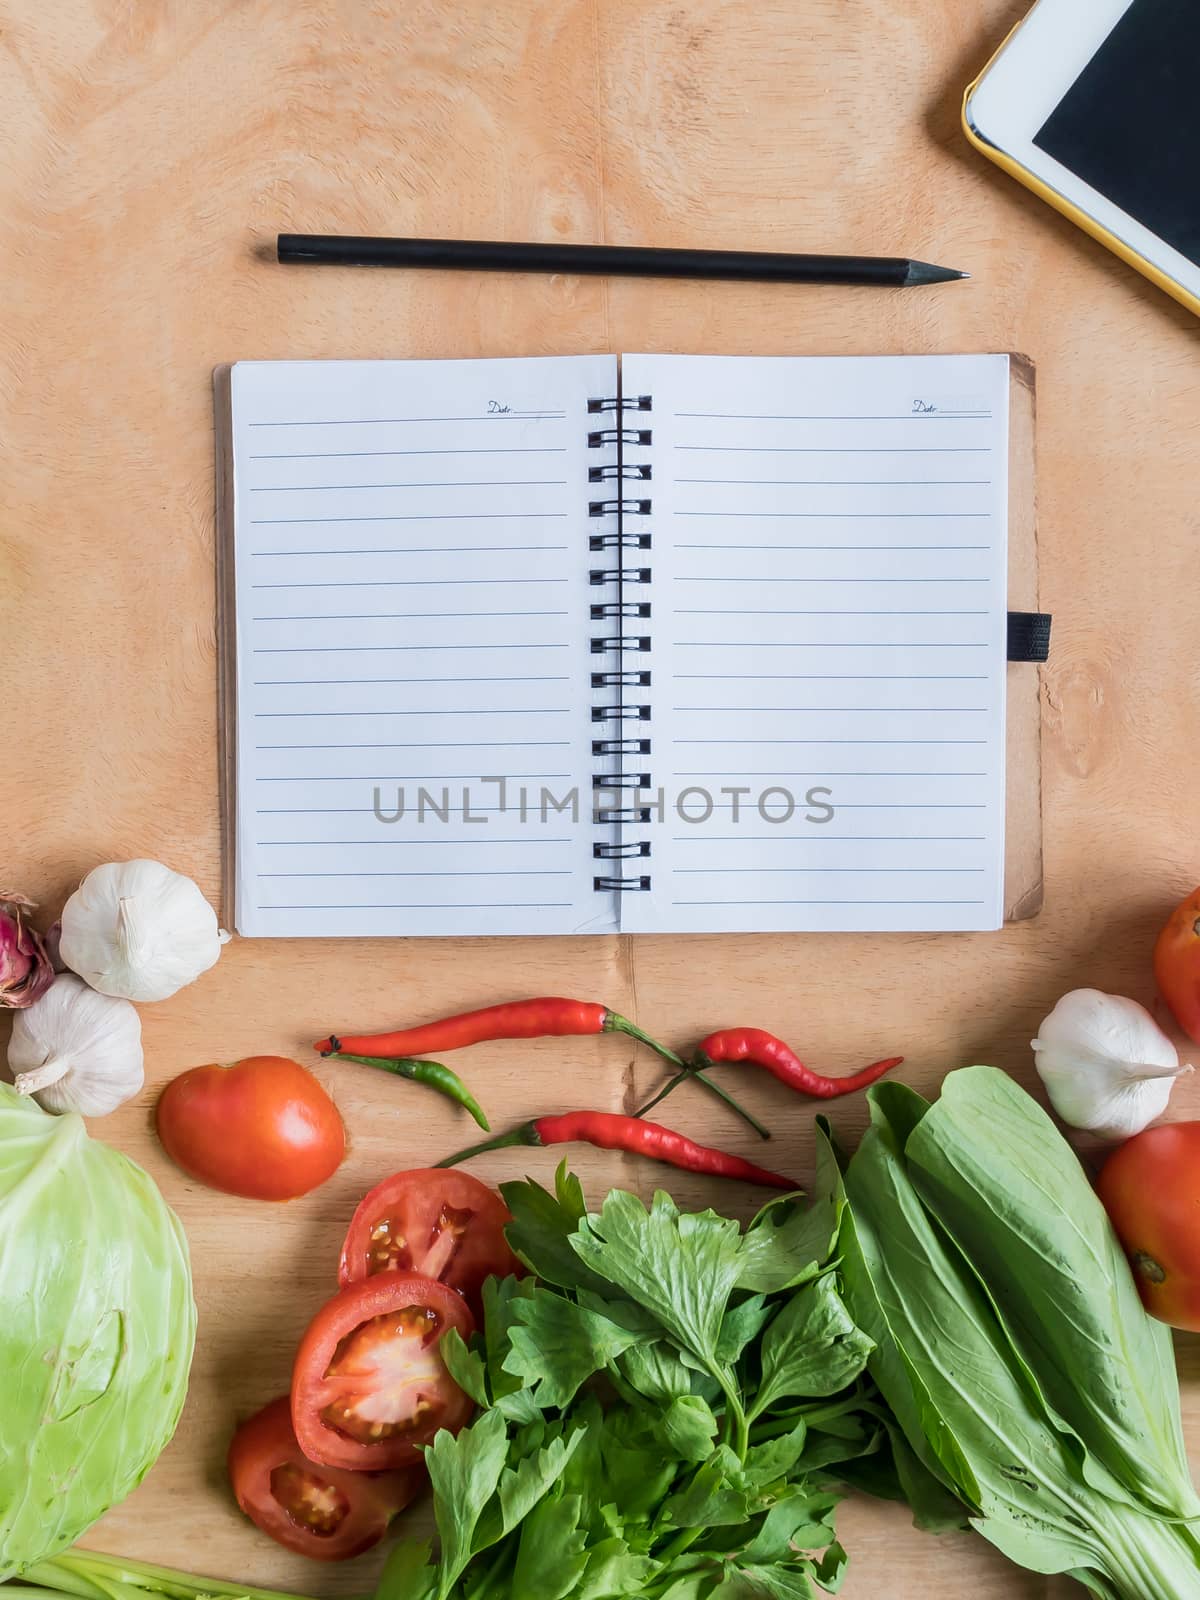 Top view of Fresh vegetables with blank notebook on wooden table background.